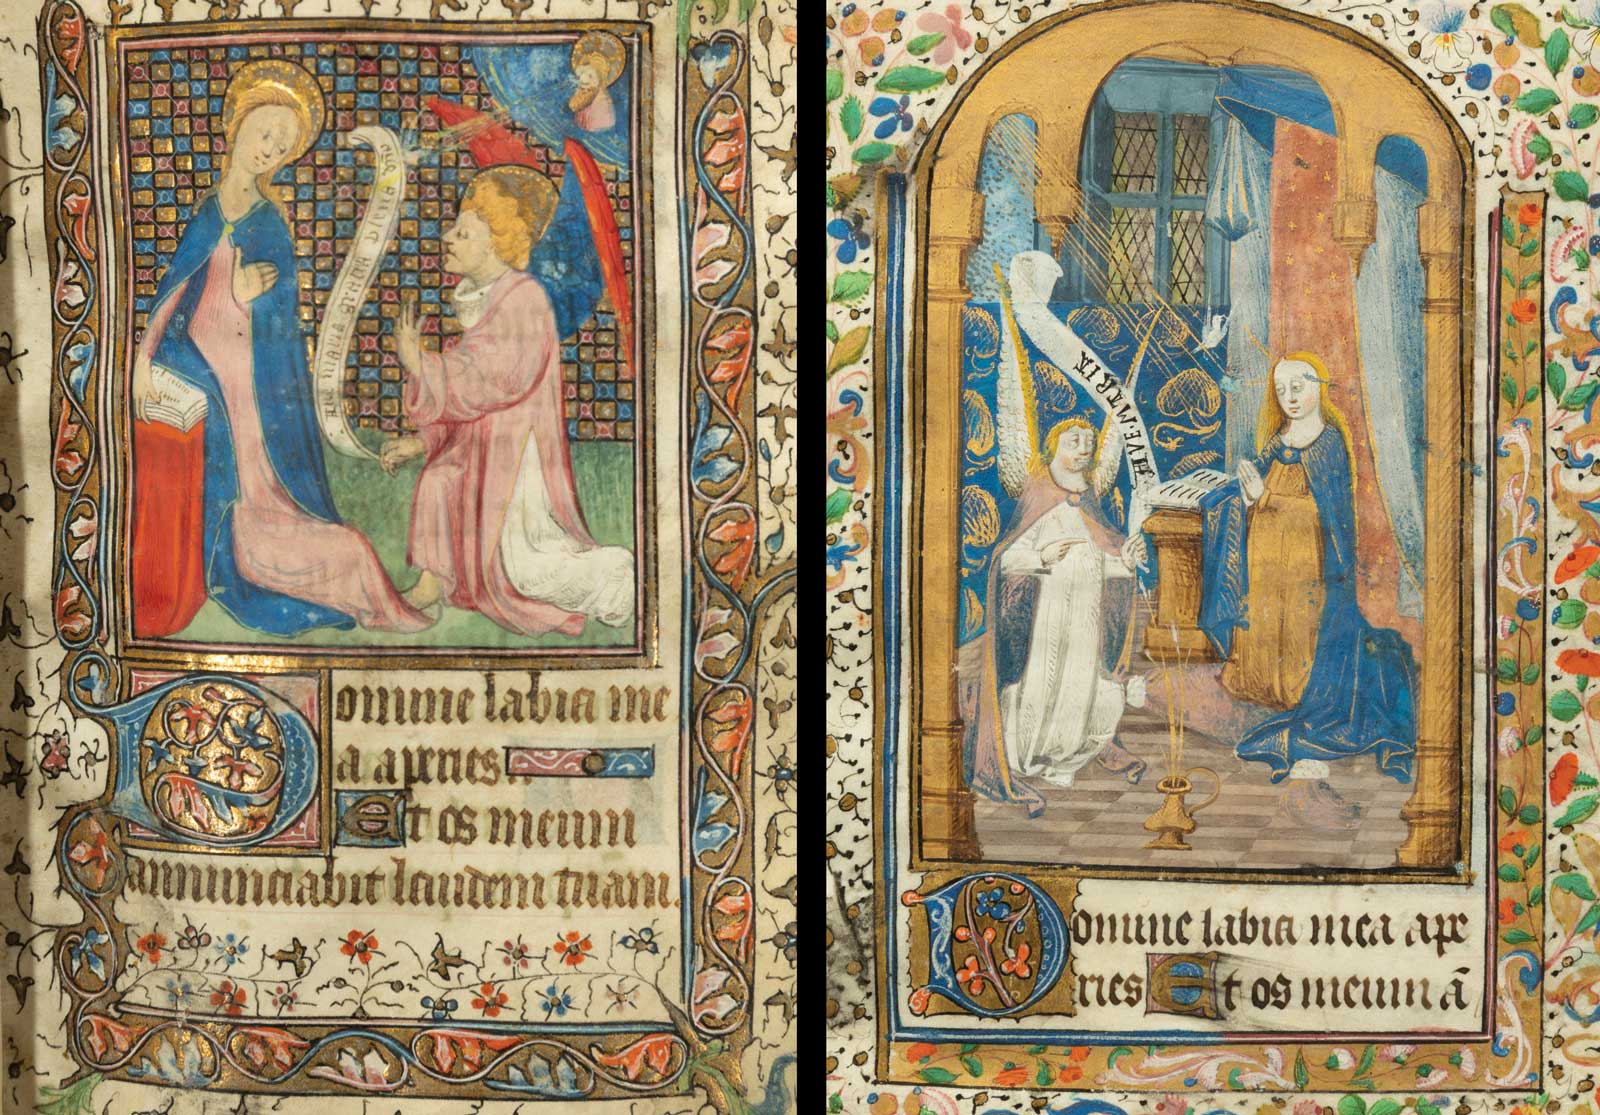 Looking at the same scene in the two books reveals similarities and differences. Take the Annunciation, for instance: Both pictures feature Mary reading and wearing a blue garment, receiving a visit from the angel Gabriel. A scroll, sort of a medieval speech bubble, has the same text: “Ave Maria.” Gabriel’s appearance and the scene in which he finds Mary are quite different in the two books.